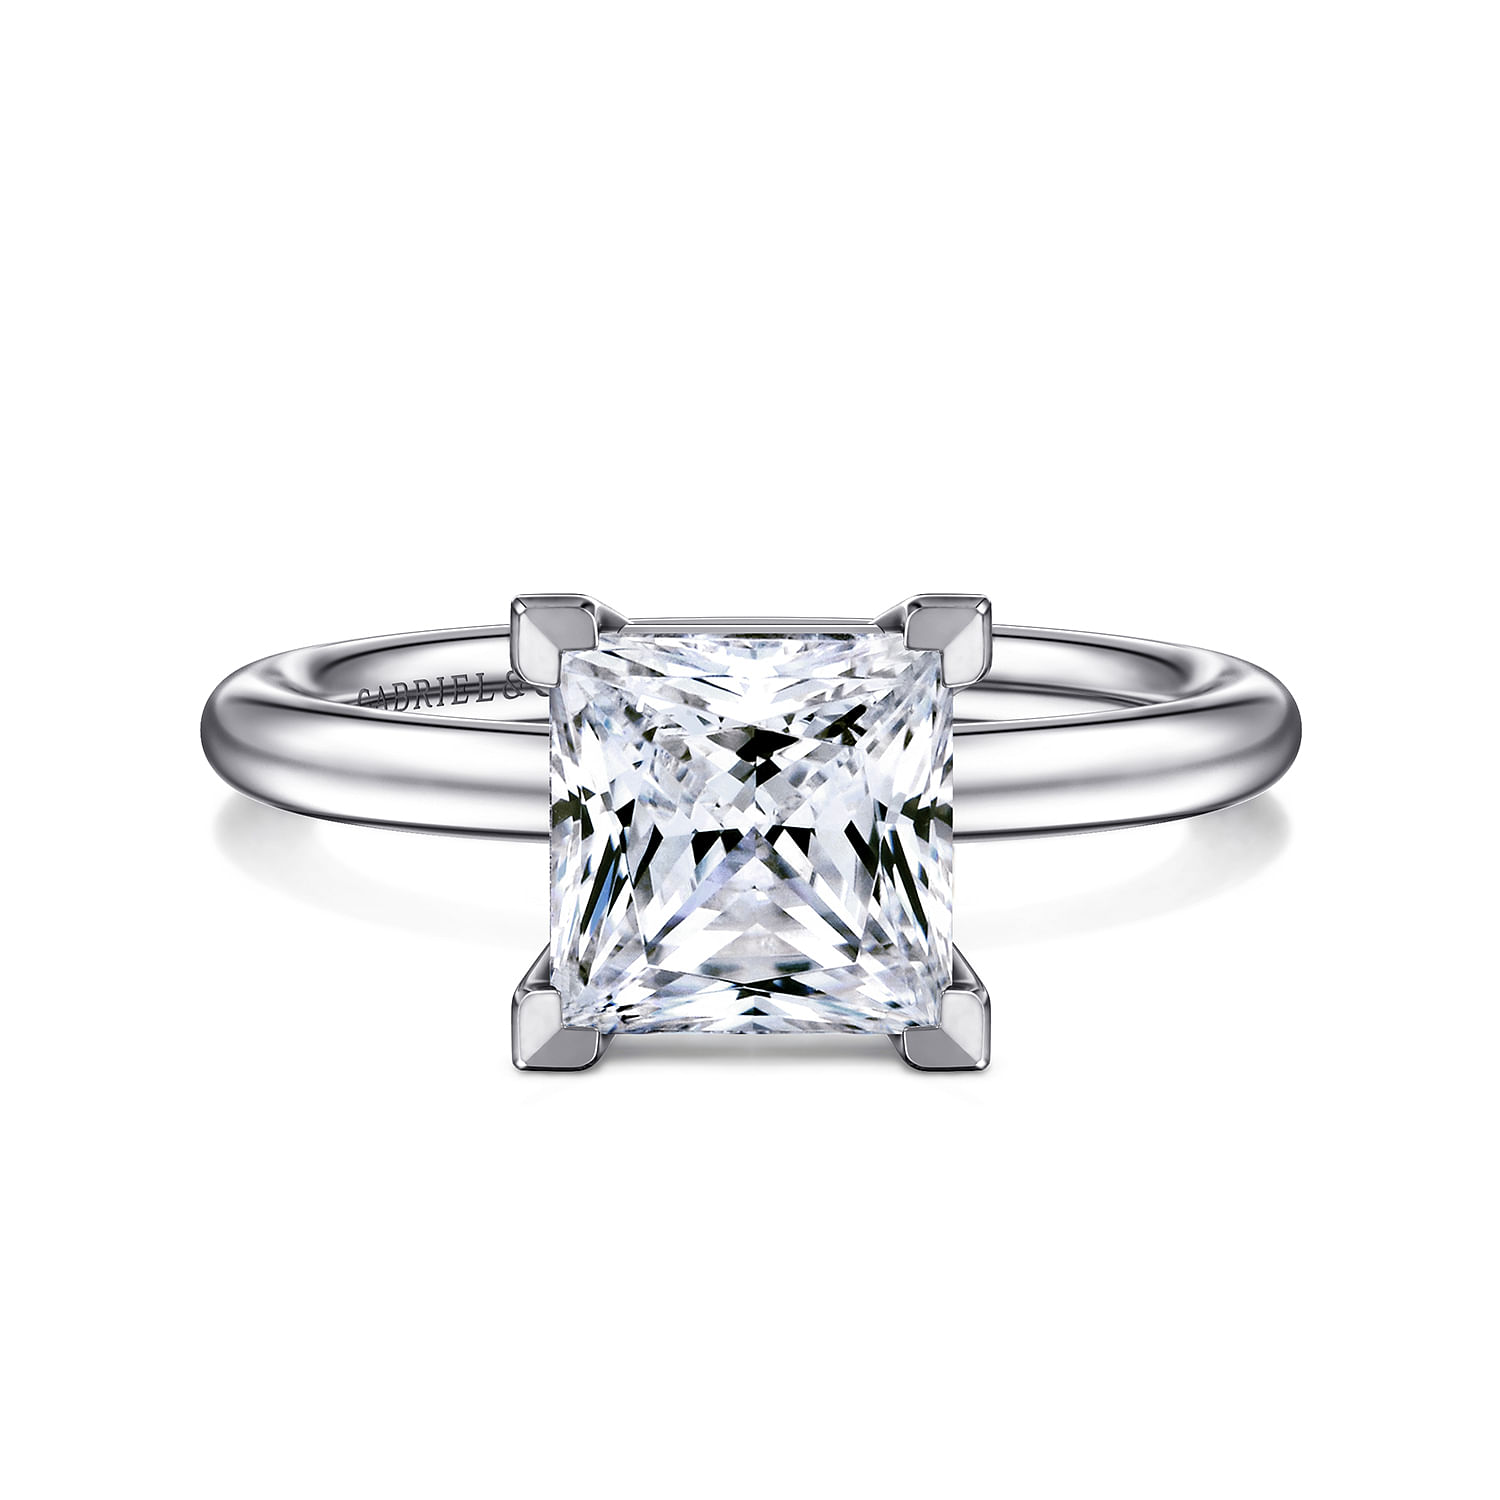 14K White Gold Princess Cut Solitaire Engagement Ring